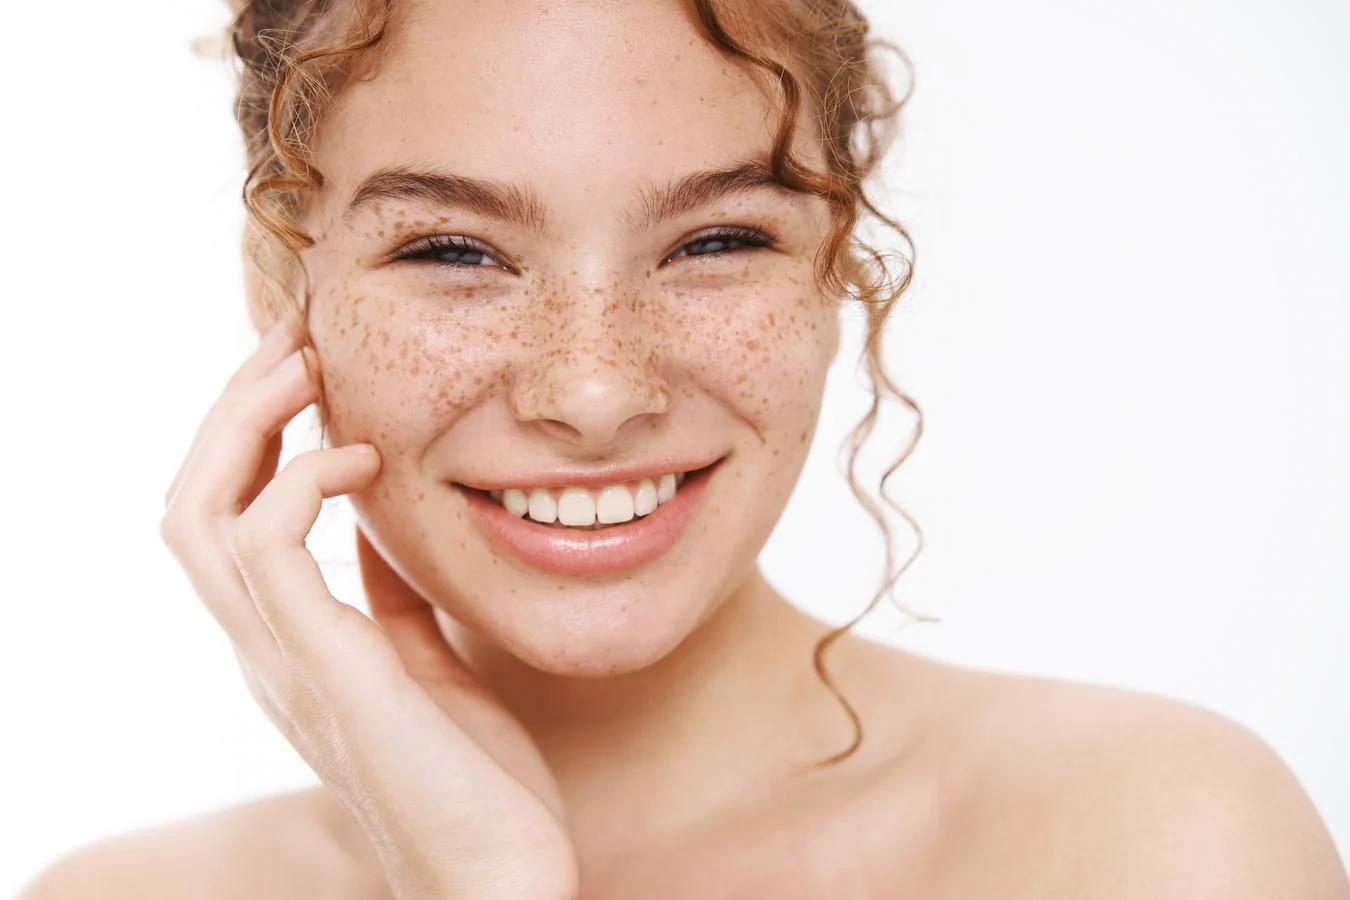 a girl smiling with freckles skincare tips sun exposure vitamin c serum skin's radiance enough sleep glowing complexion